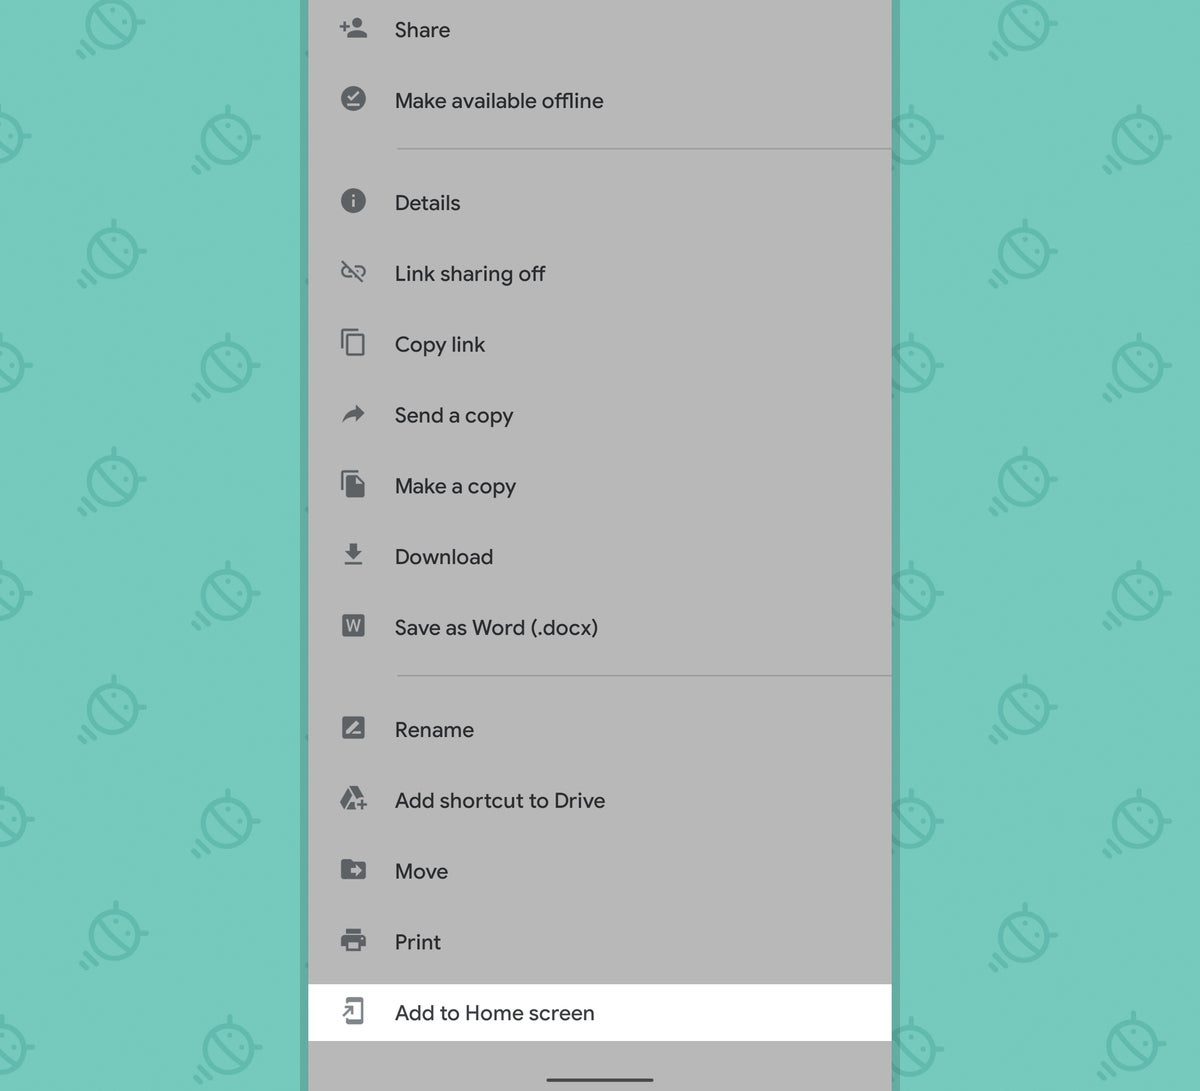 Google Docs Android: Add to home screen